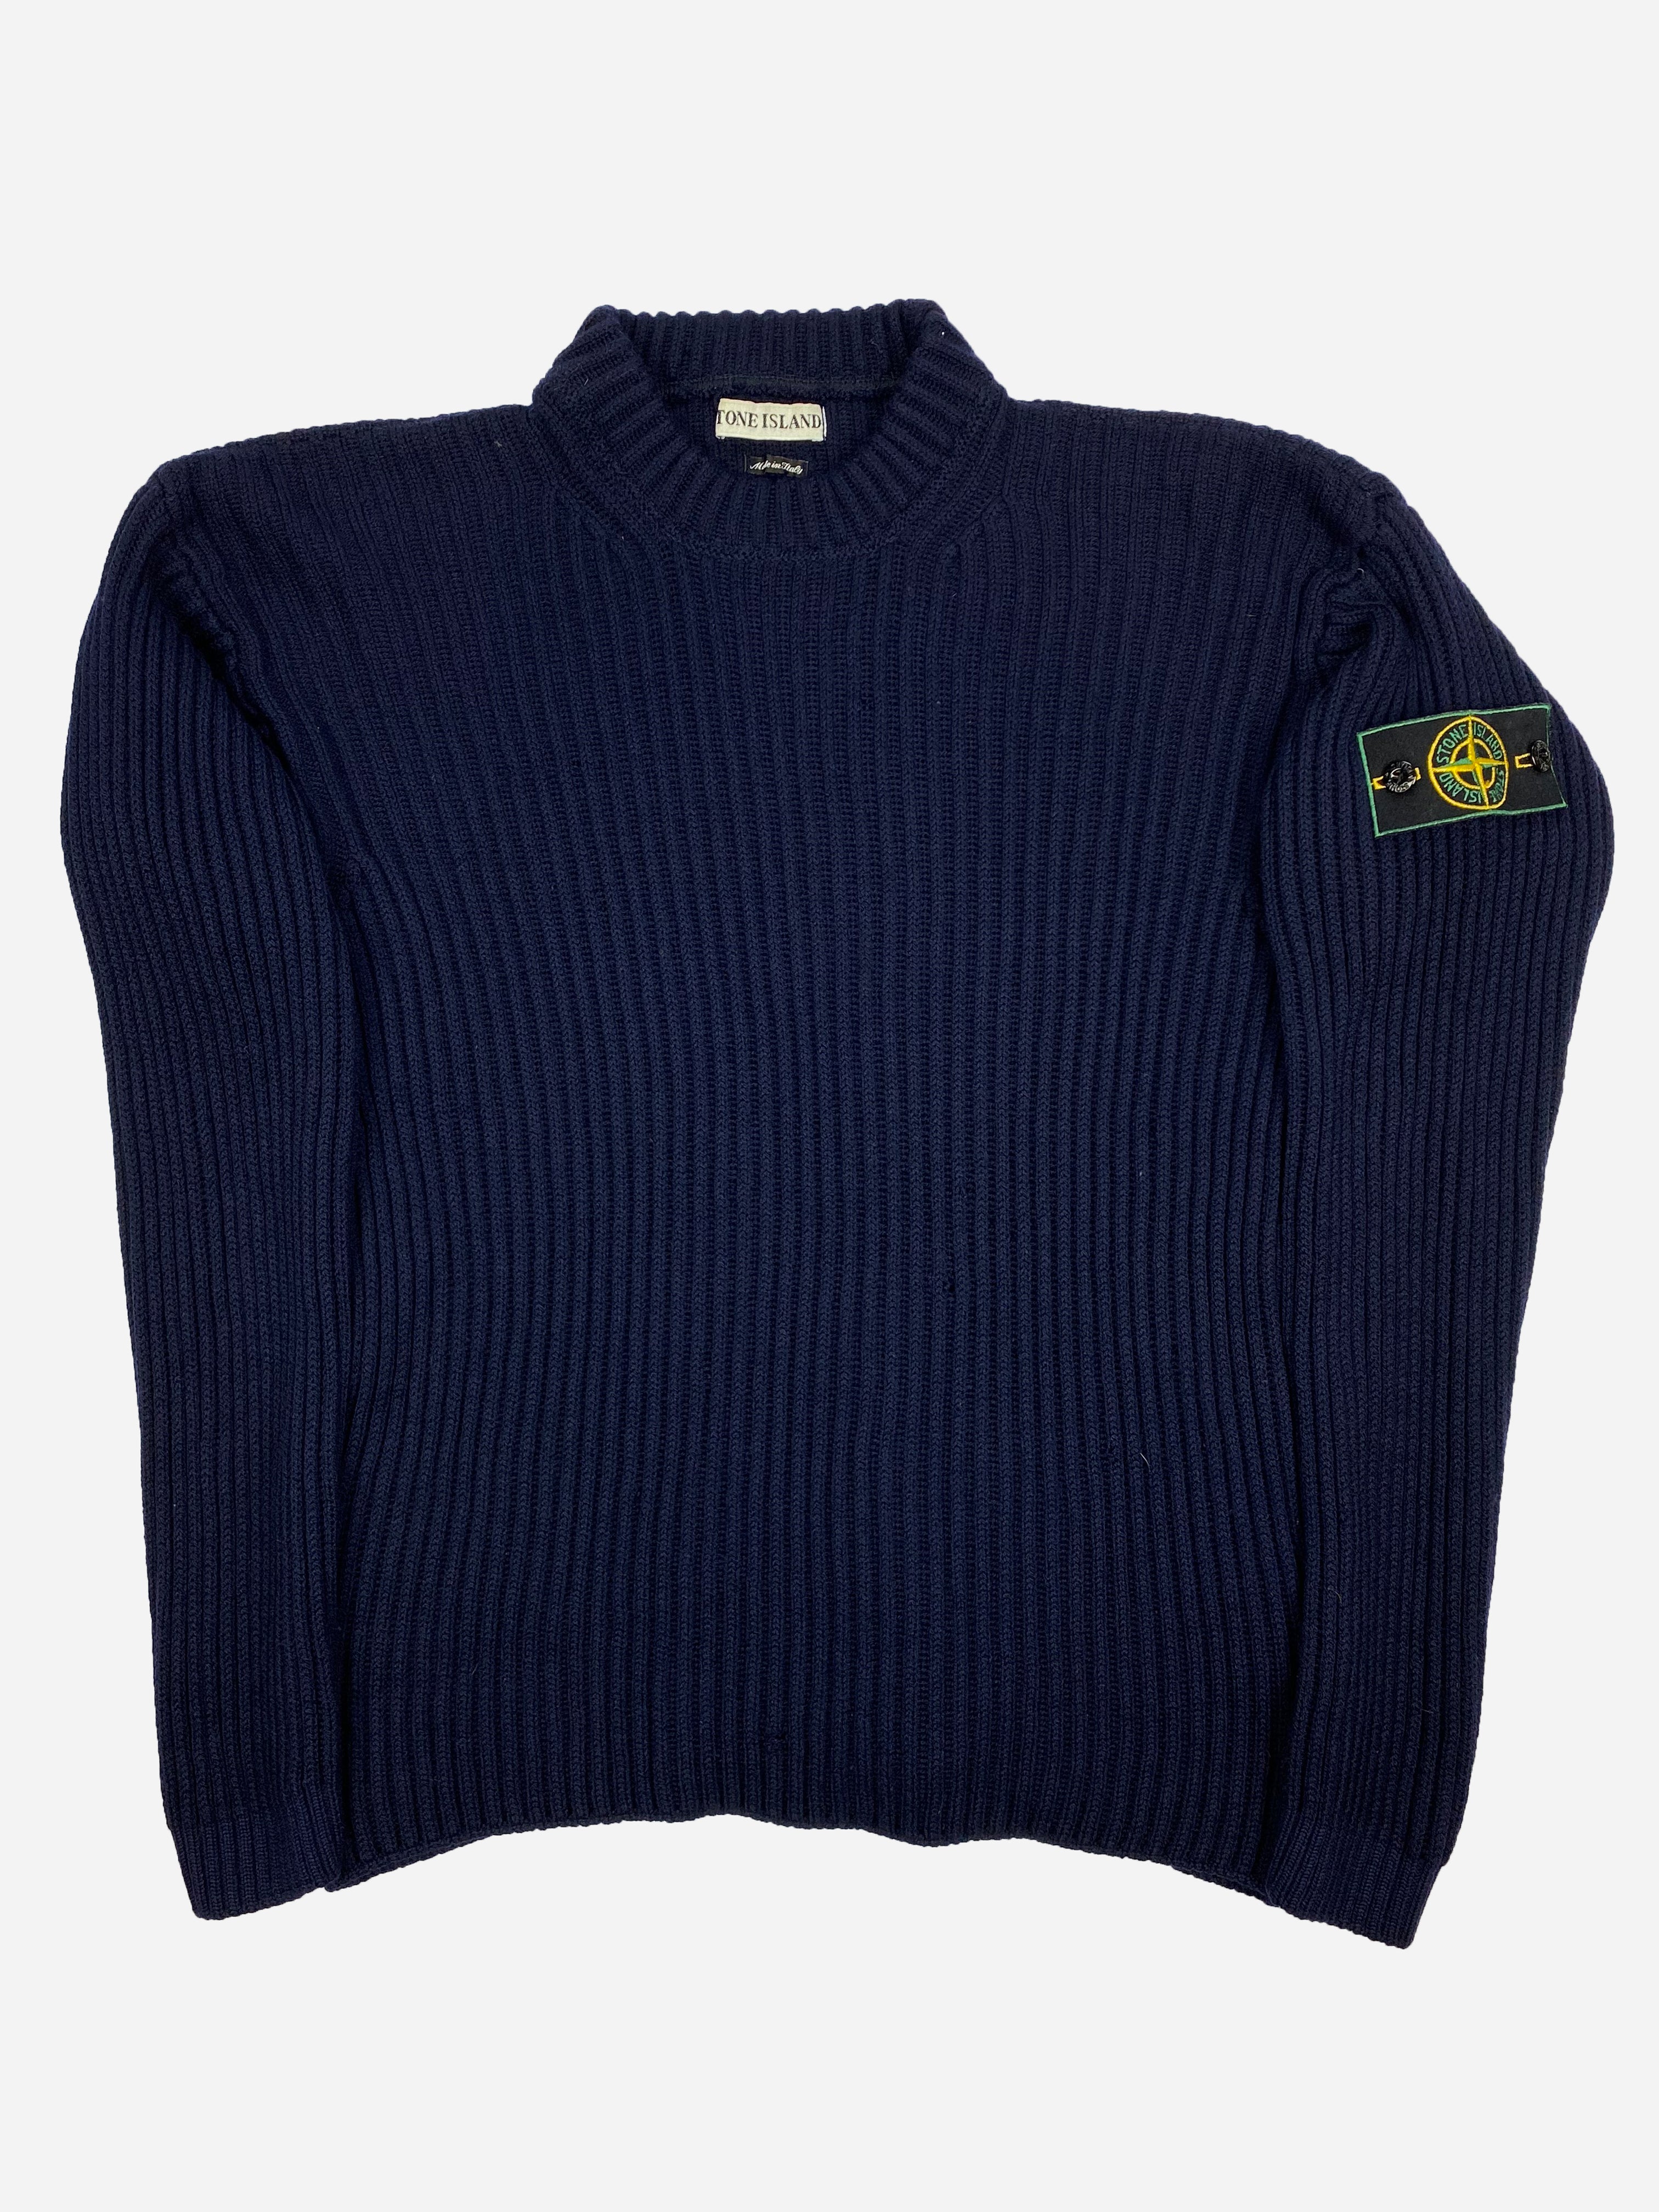 stone island knit sweater 97aw - tracemed.com.br